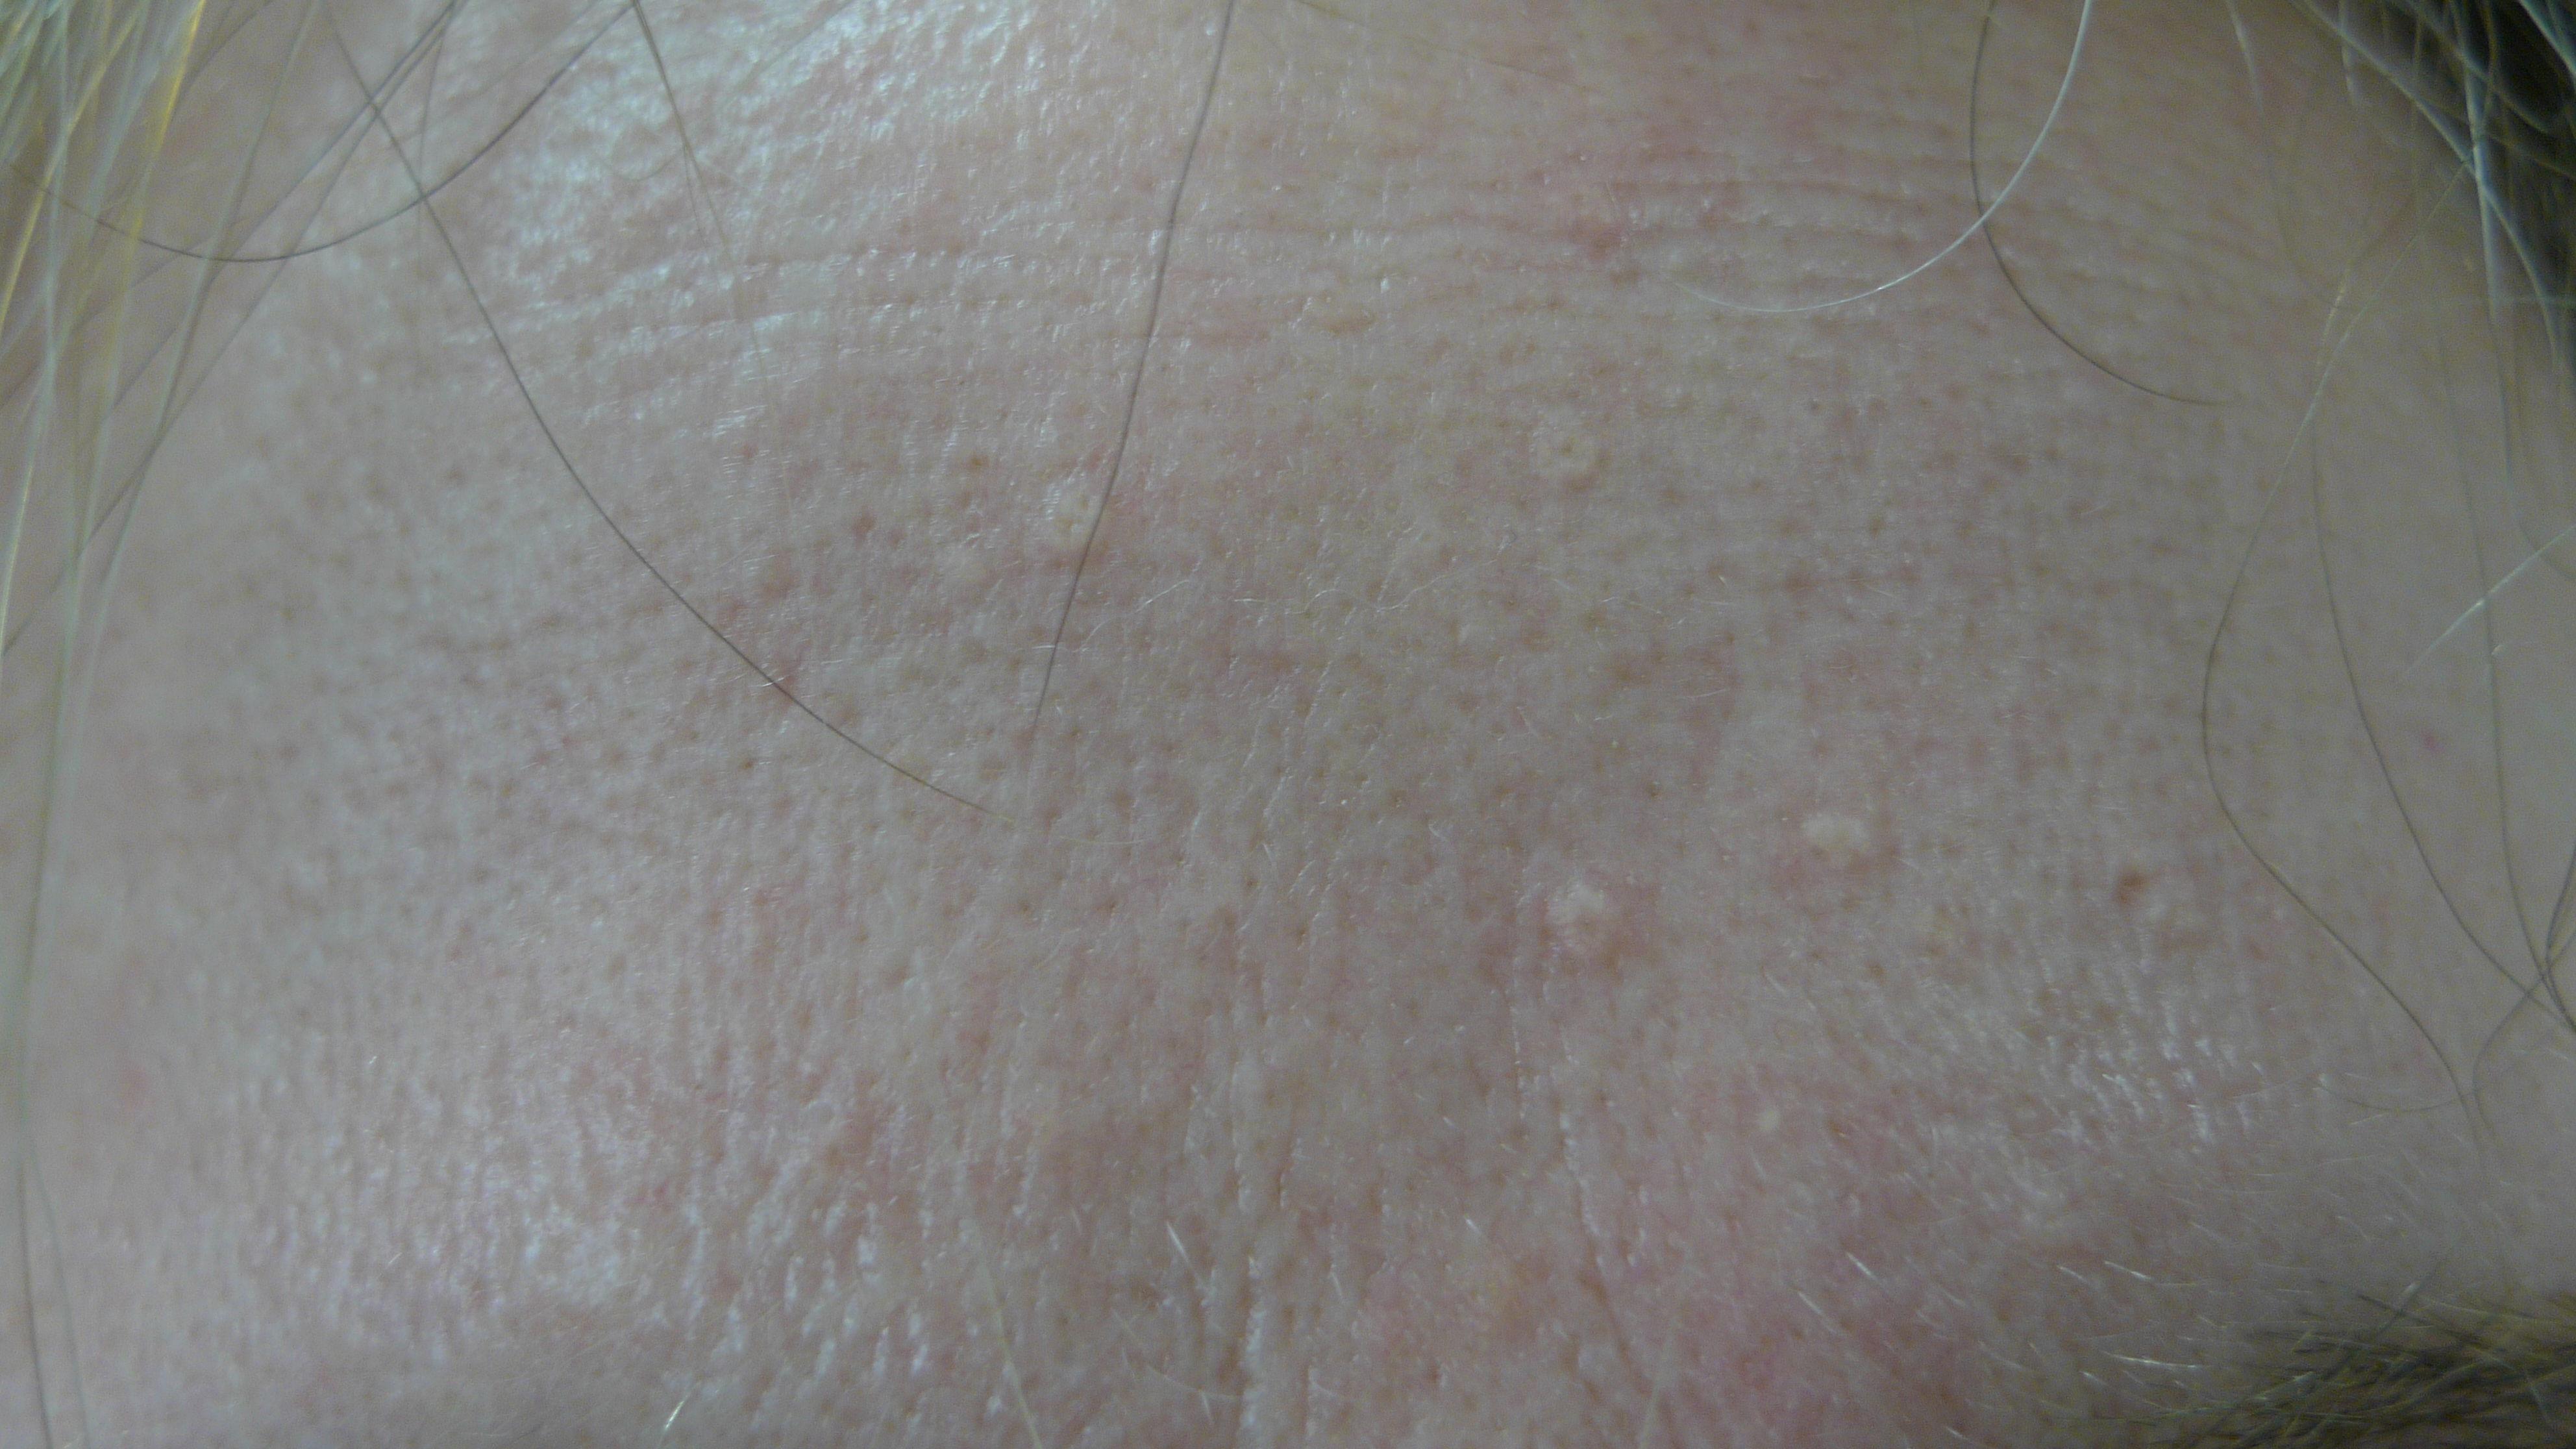 Sebaceous hyperplasia Images reproduced with permission of Dr Davin Lim